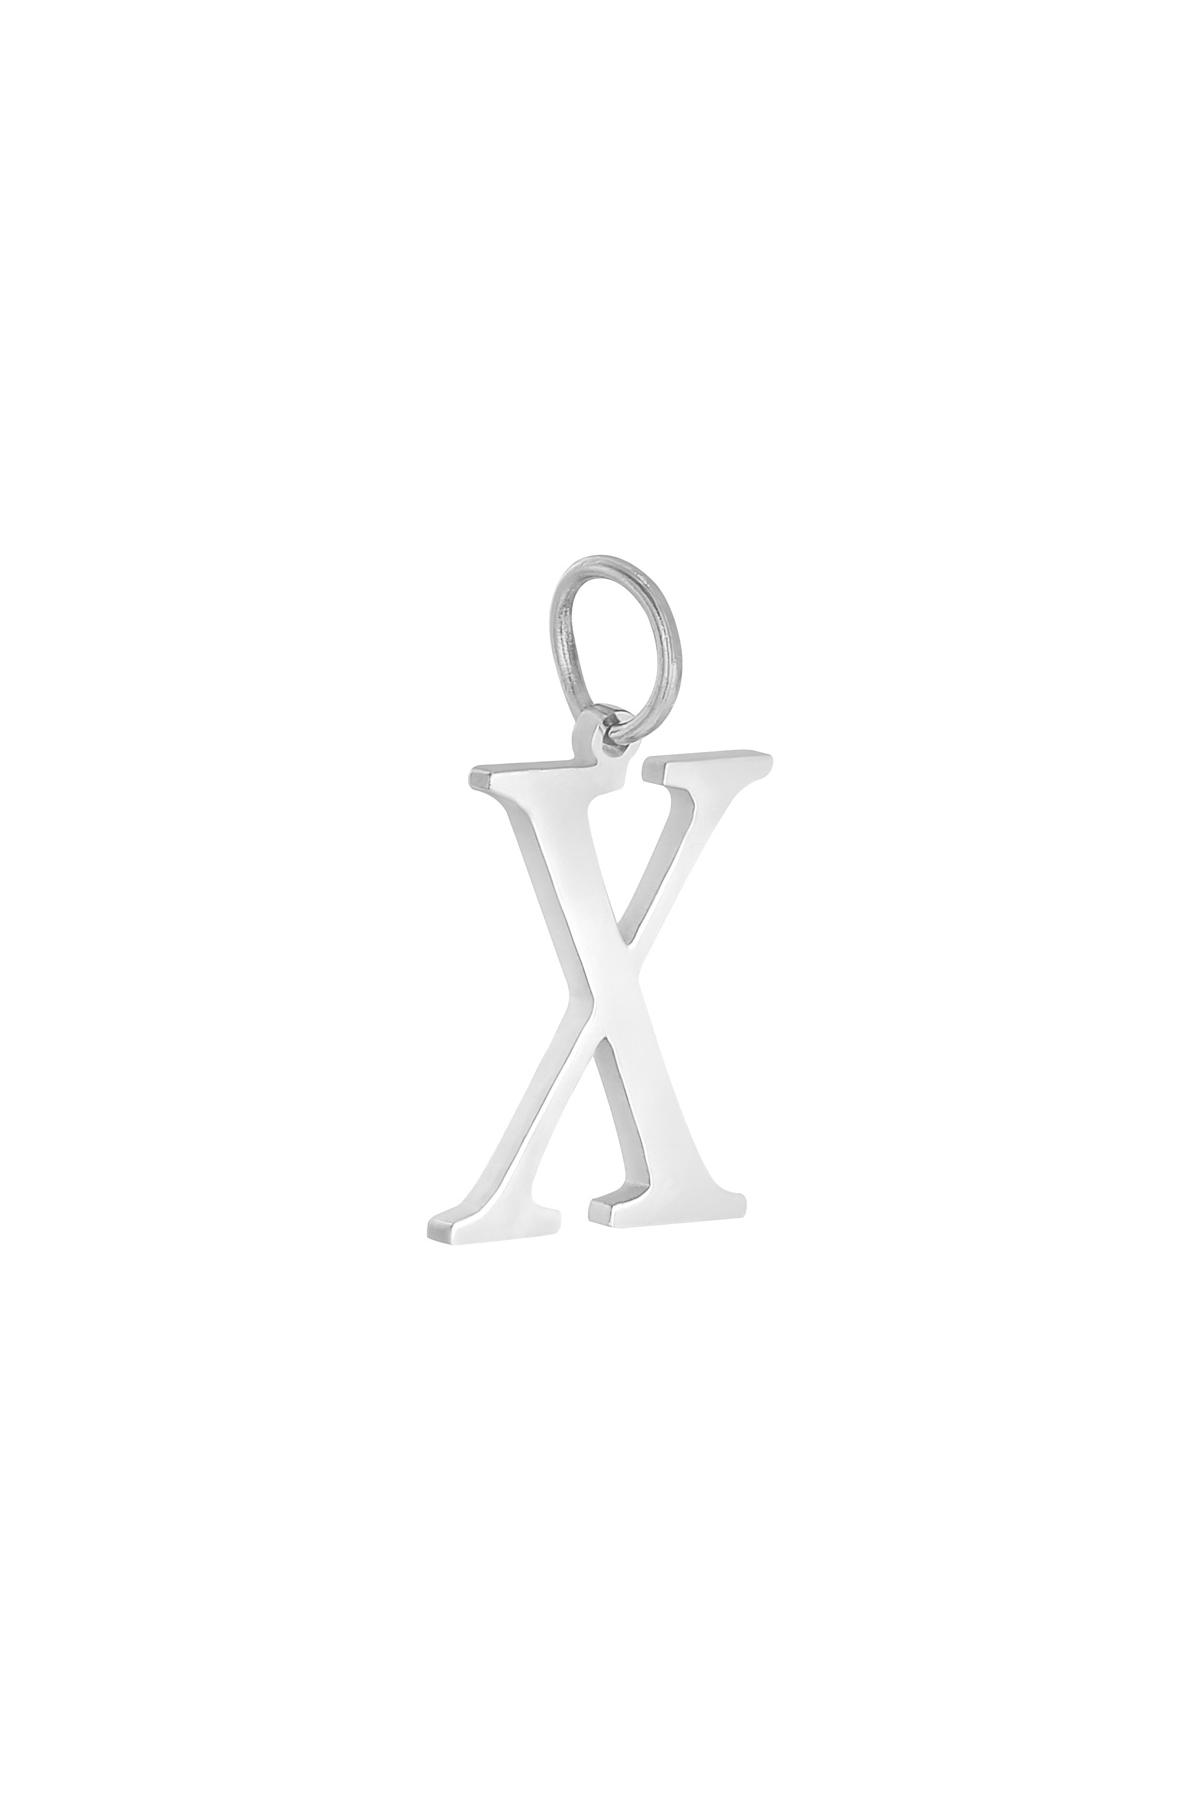 Silver / Charm X Silver Stainless Steel Immagine32